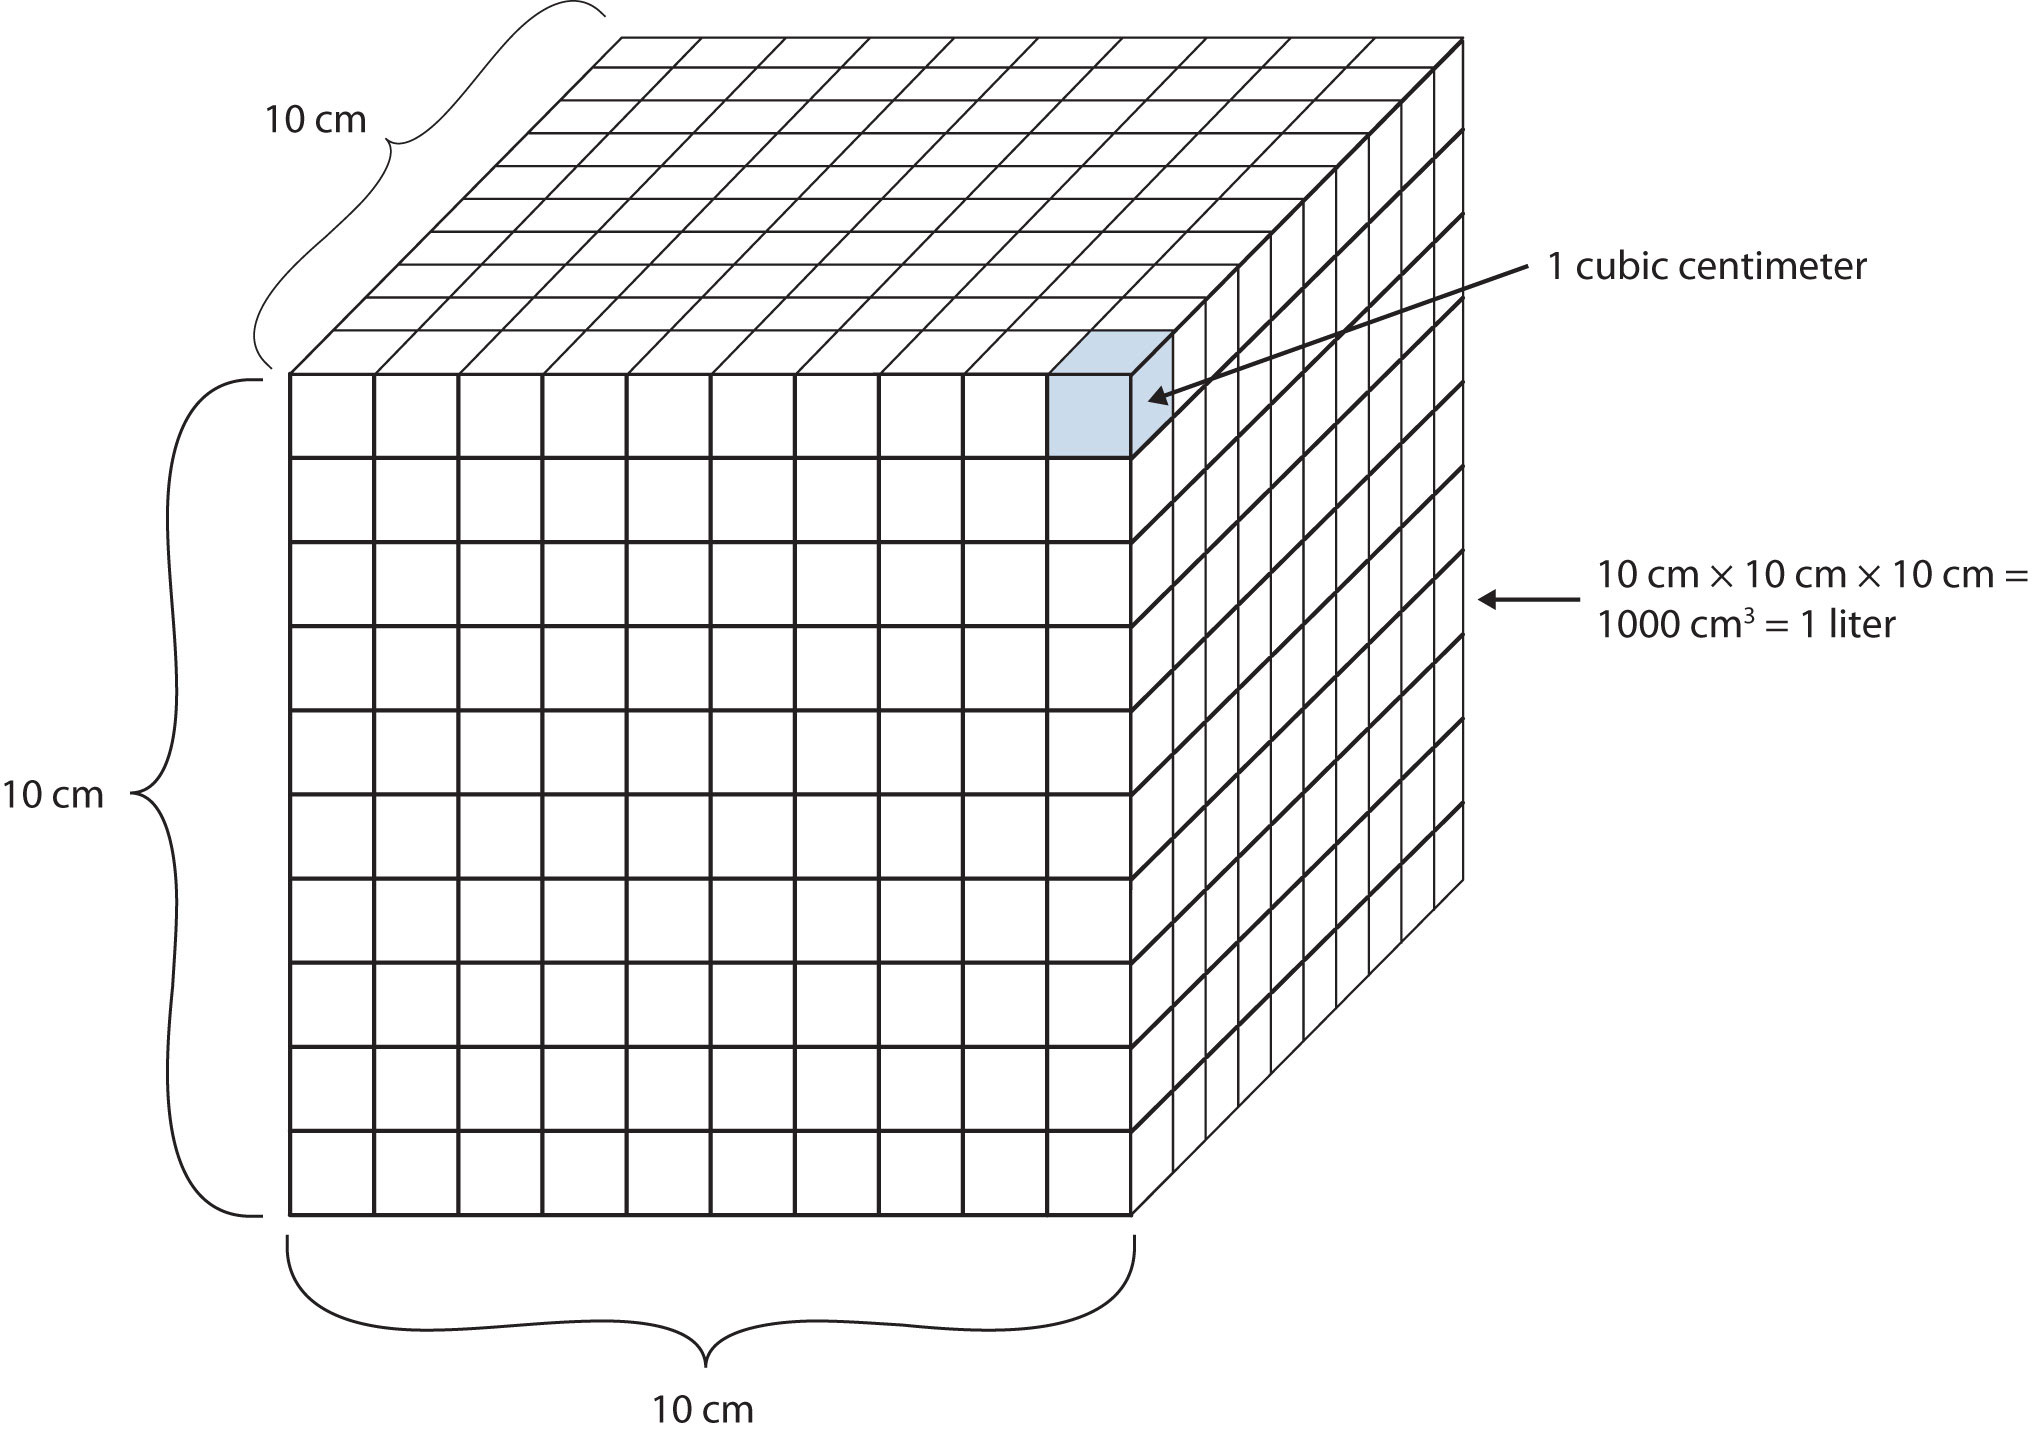 A liter is shown being represented by a 10 x 10 x 10 cm cube.